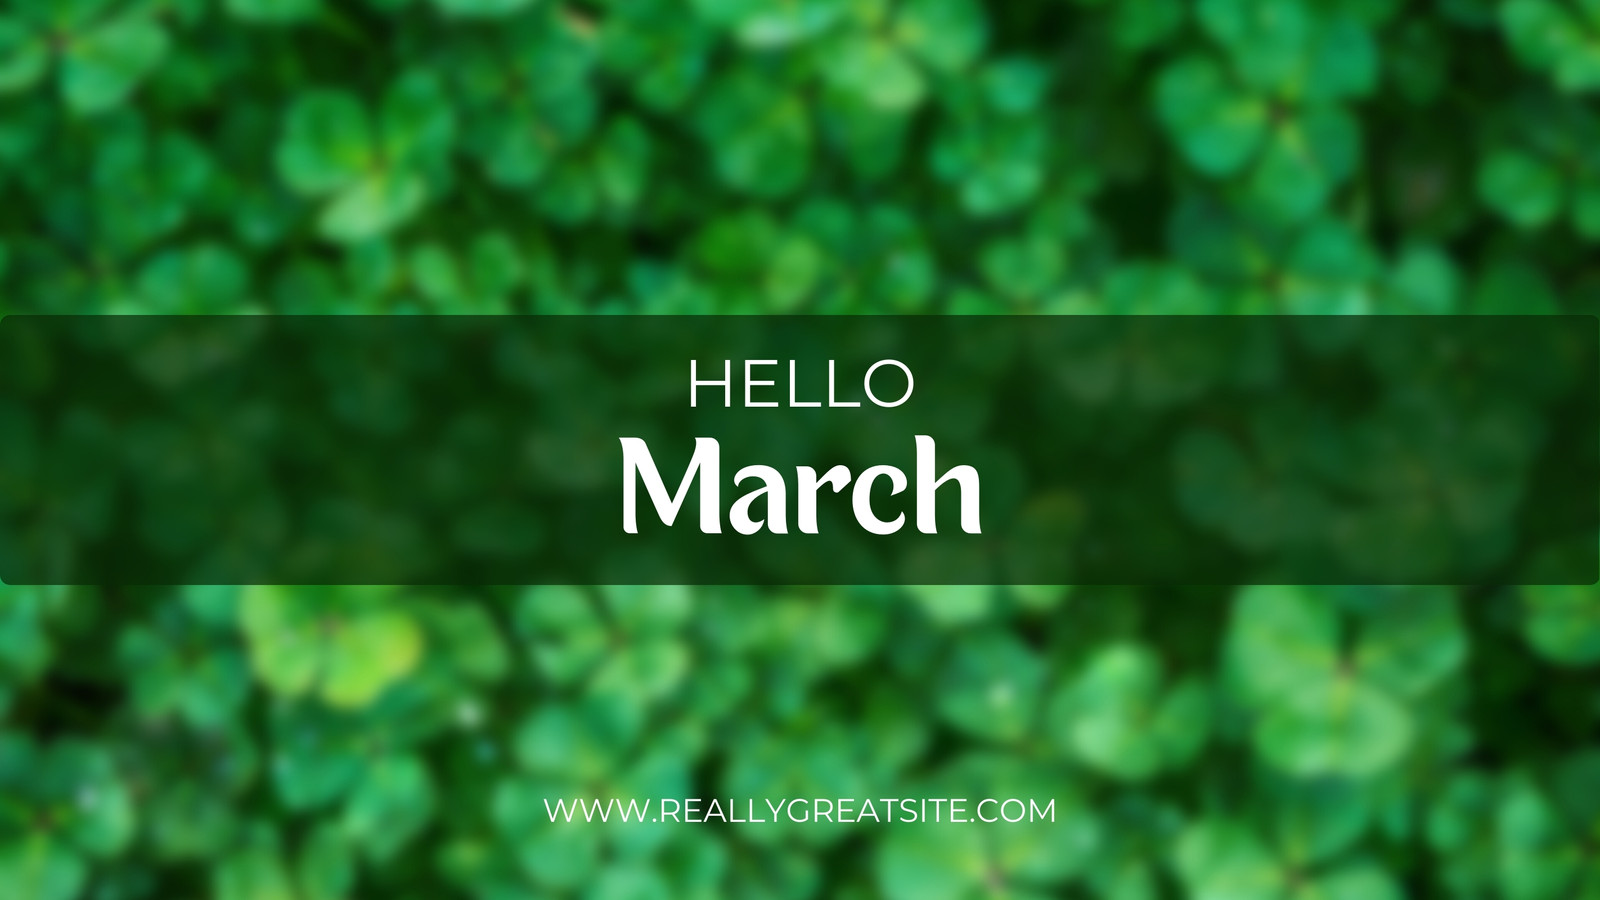 Hello March. Green clover leaves as background Stock Photo